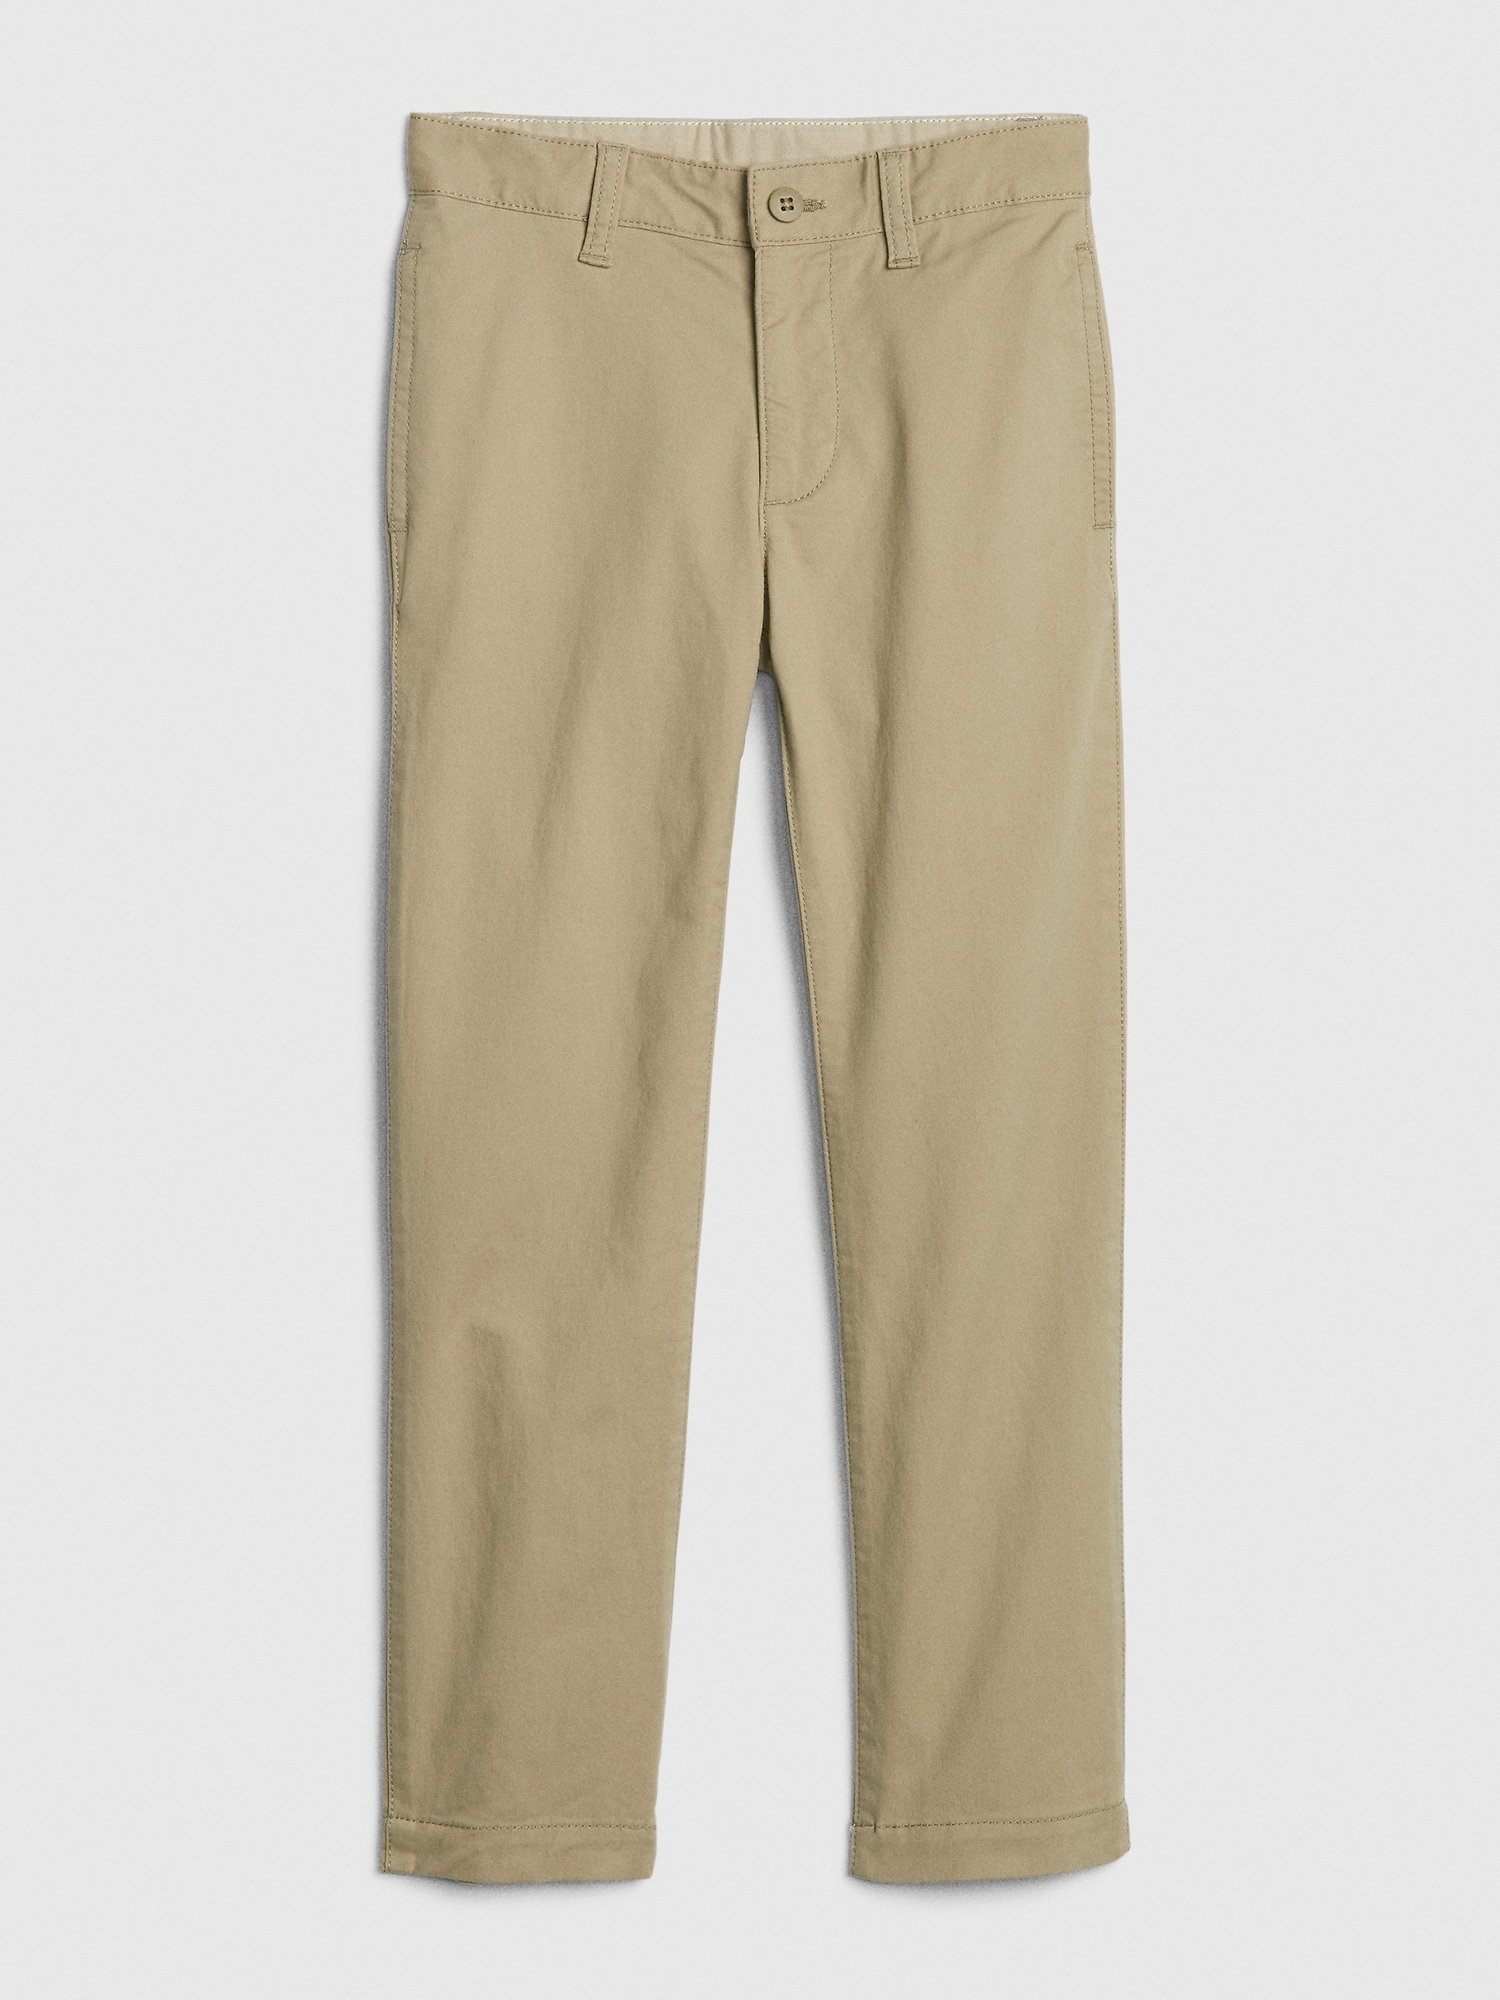 Kids Uniform Relaxed Fit Khakis with Gap Shield | Gap